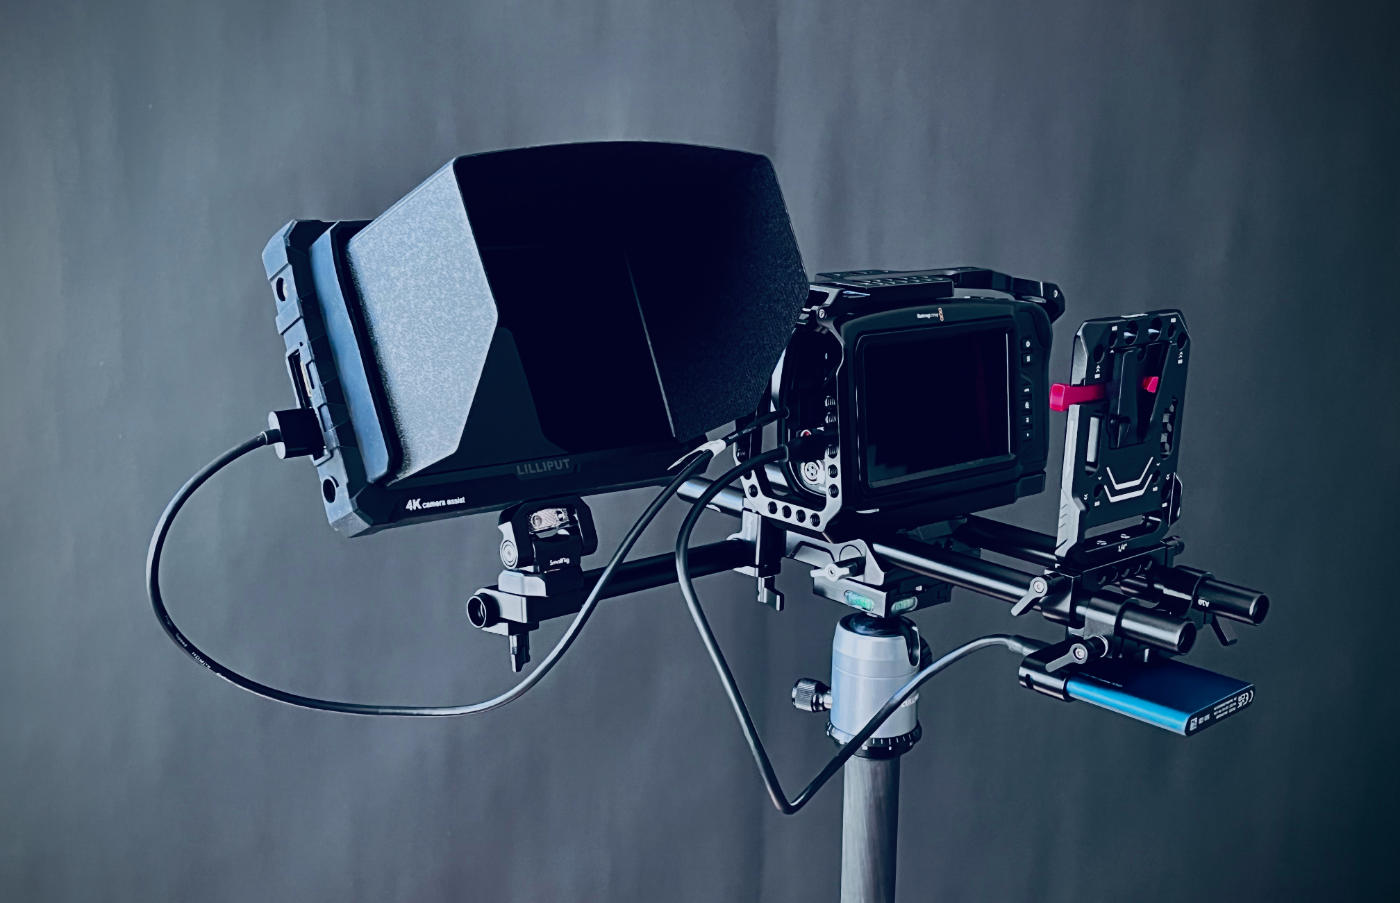 Video camera rig built with metal rods with a monitor on the side, view from the back